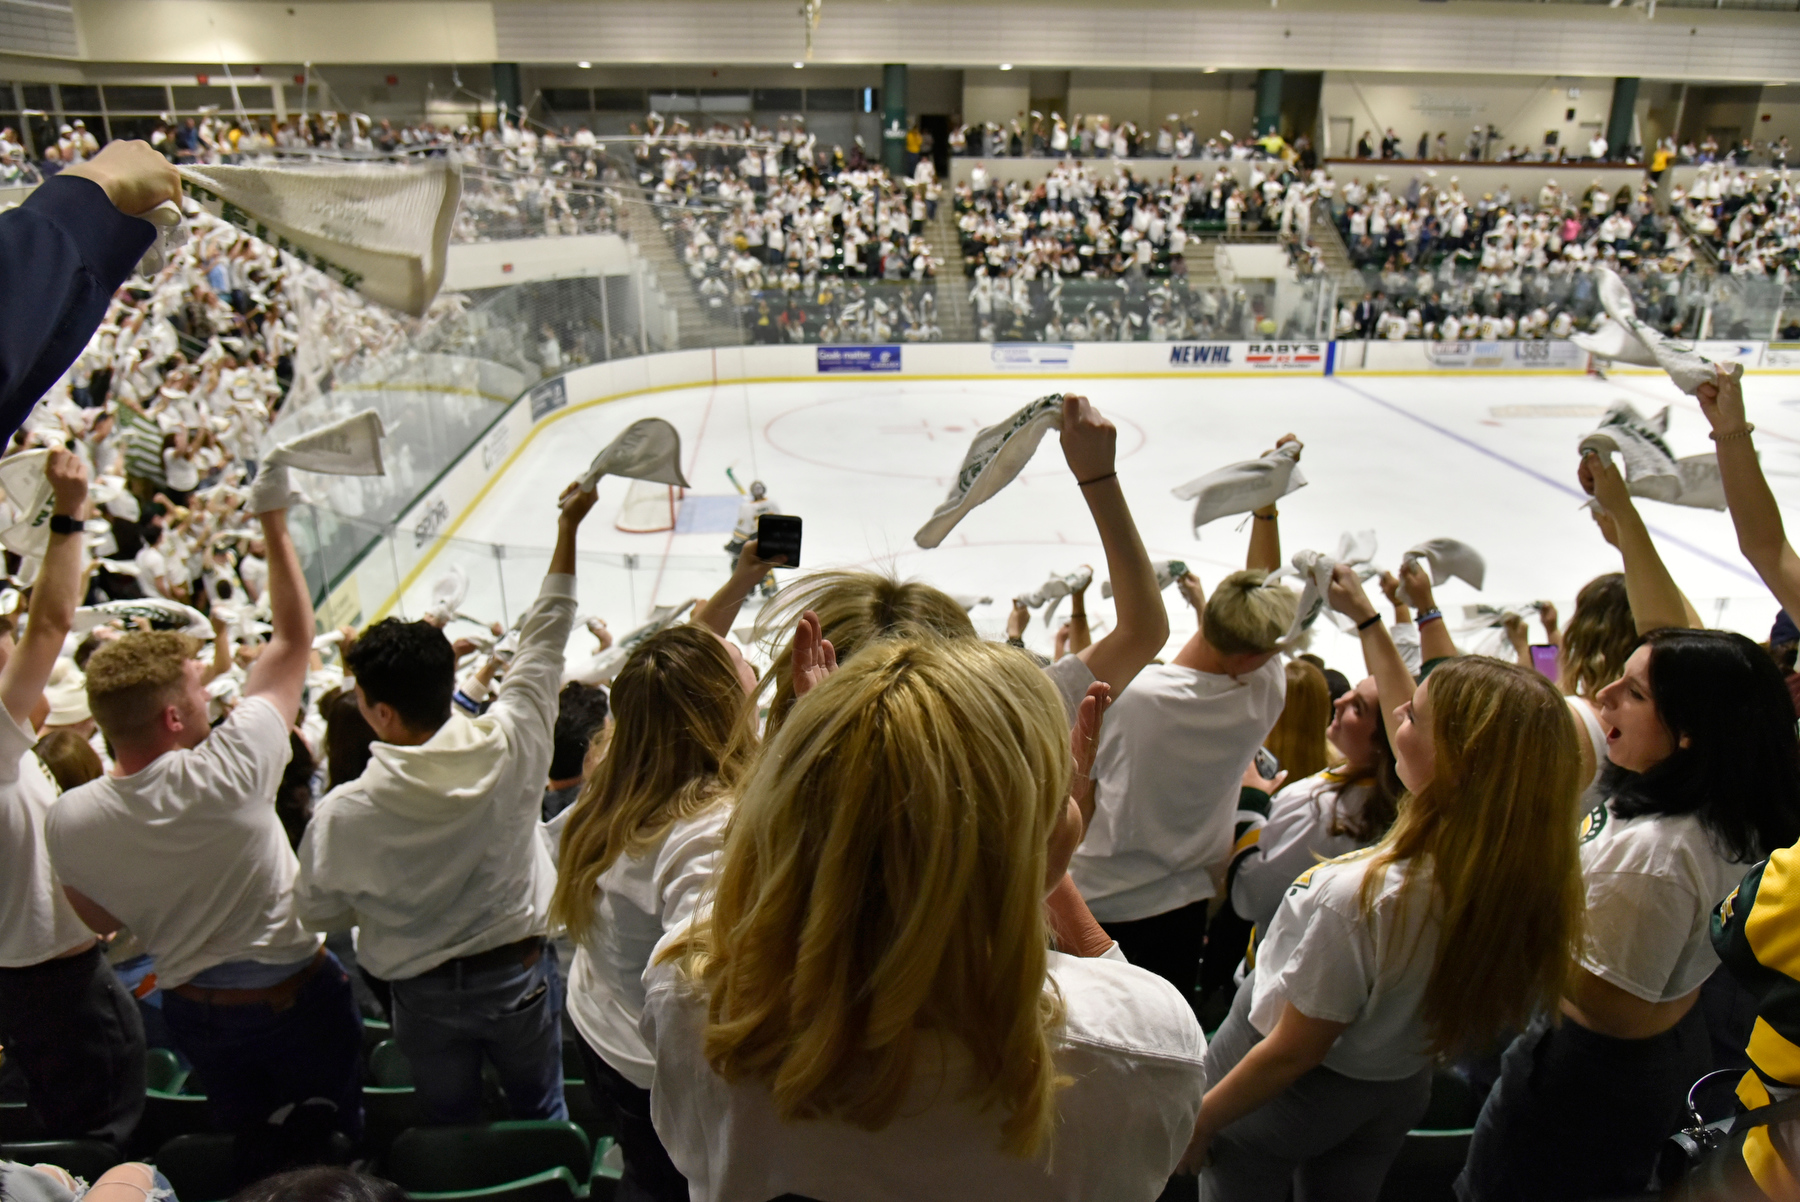 Oswego fans celebrate Nov. 4 during the Lakers men's hockey contest with the archrival Plattsburgh Cardinals during White Out weekend. The Lakers skated away with a 5-1 win.